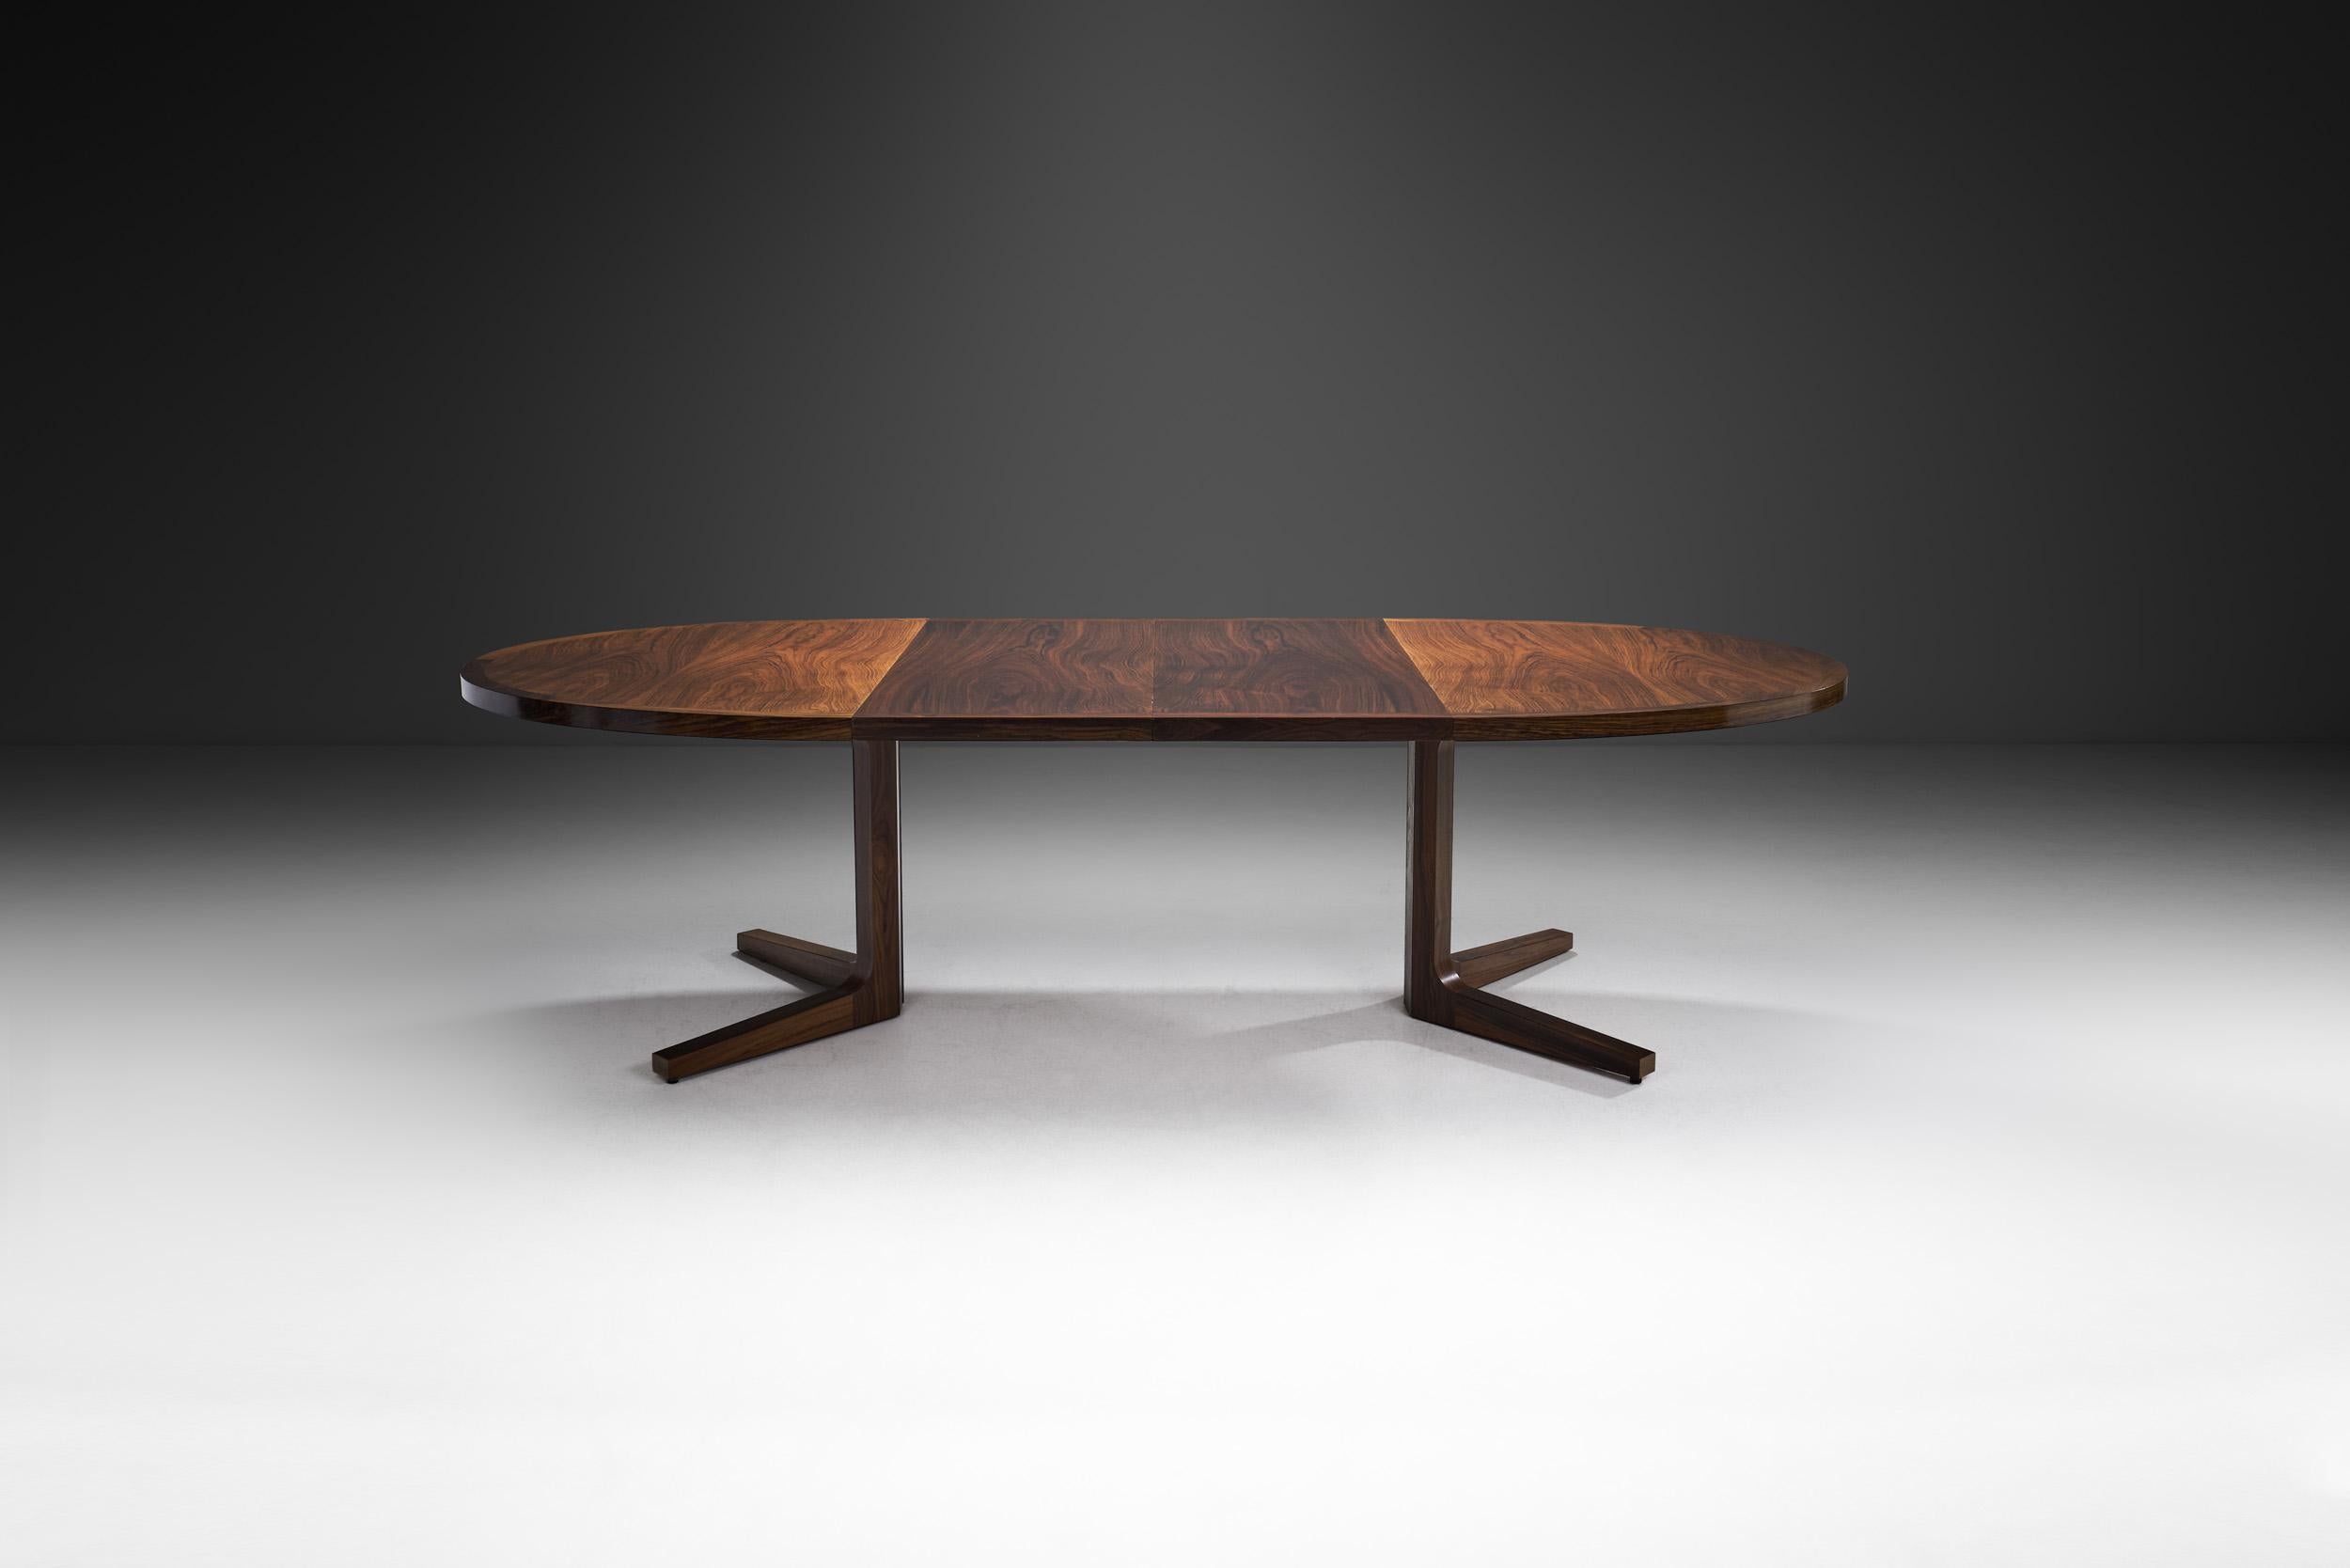 Scandinavian Modern Dyrlund Extendable Dining Table from Solid Wood, Denmark ca 1960s